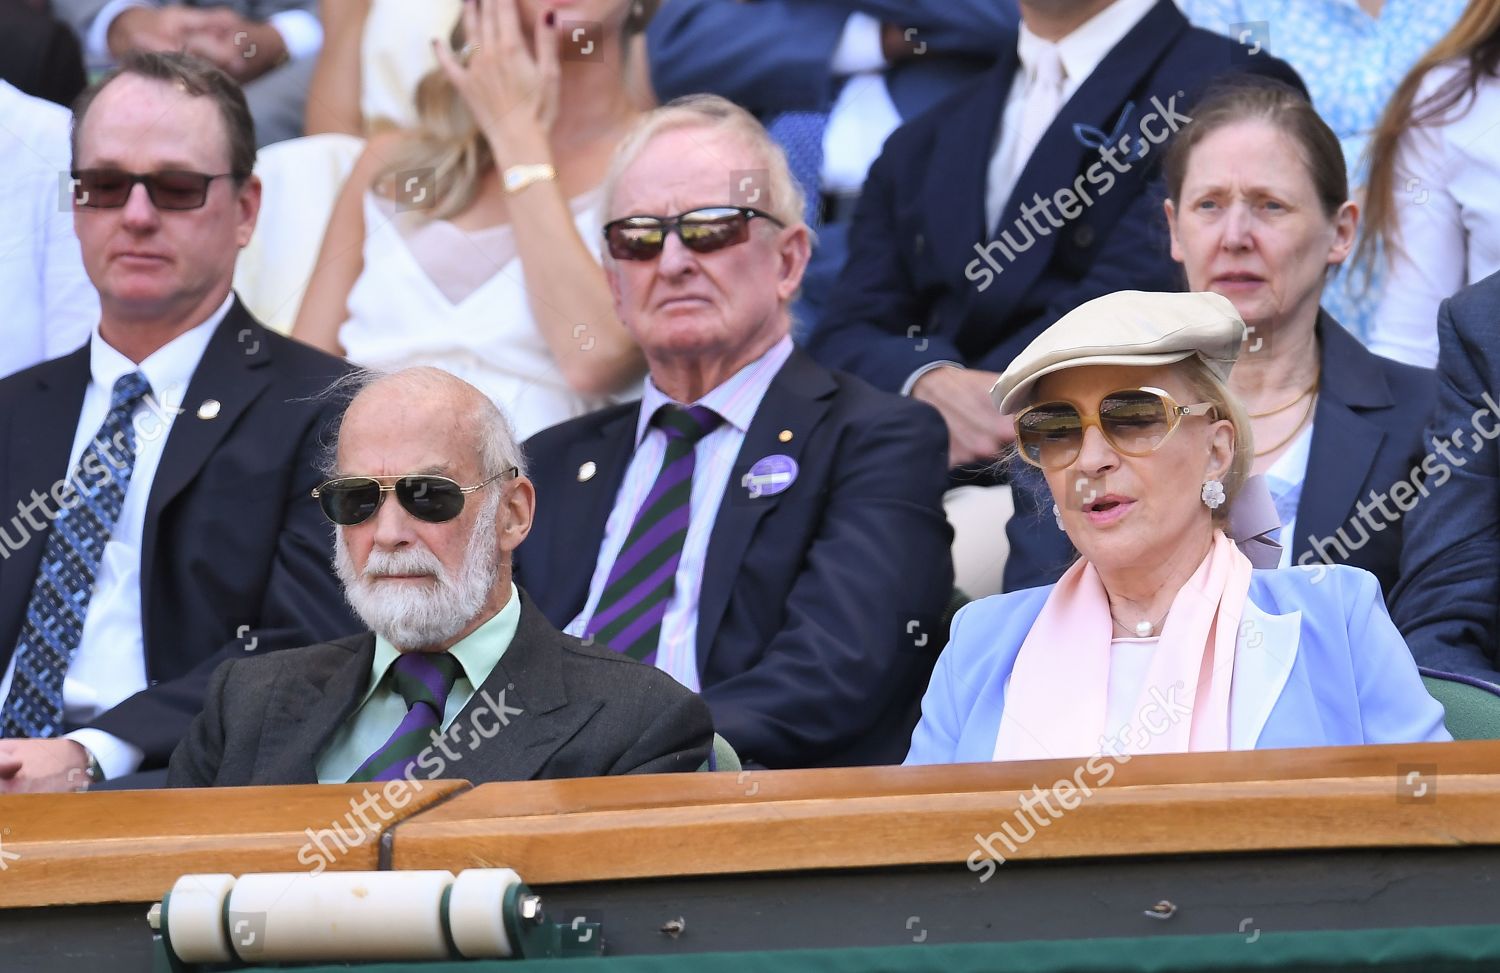 wimbledon-tennis-championships-day-11-the-all-england-lawn-tennis-and-croquet-club-london-uk-shutterstock-editorial-10332776ds.jpg